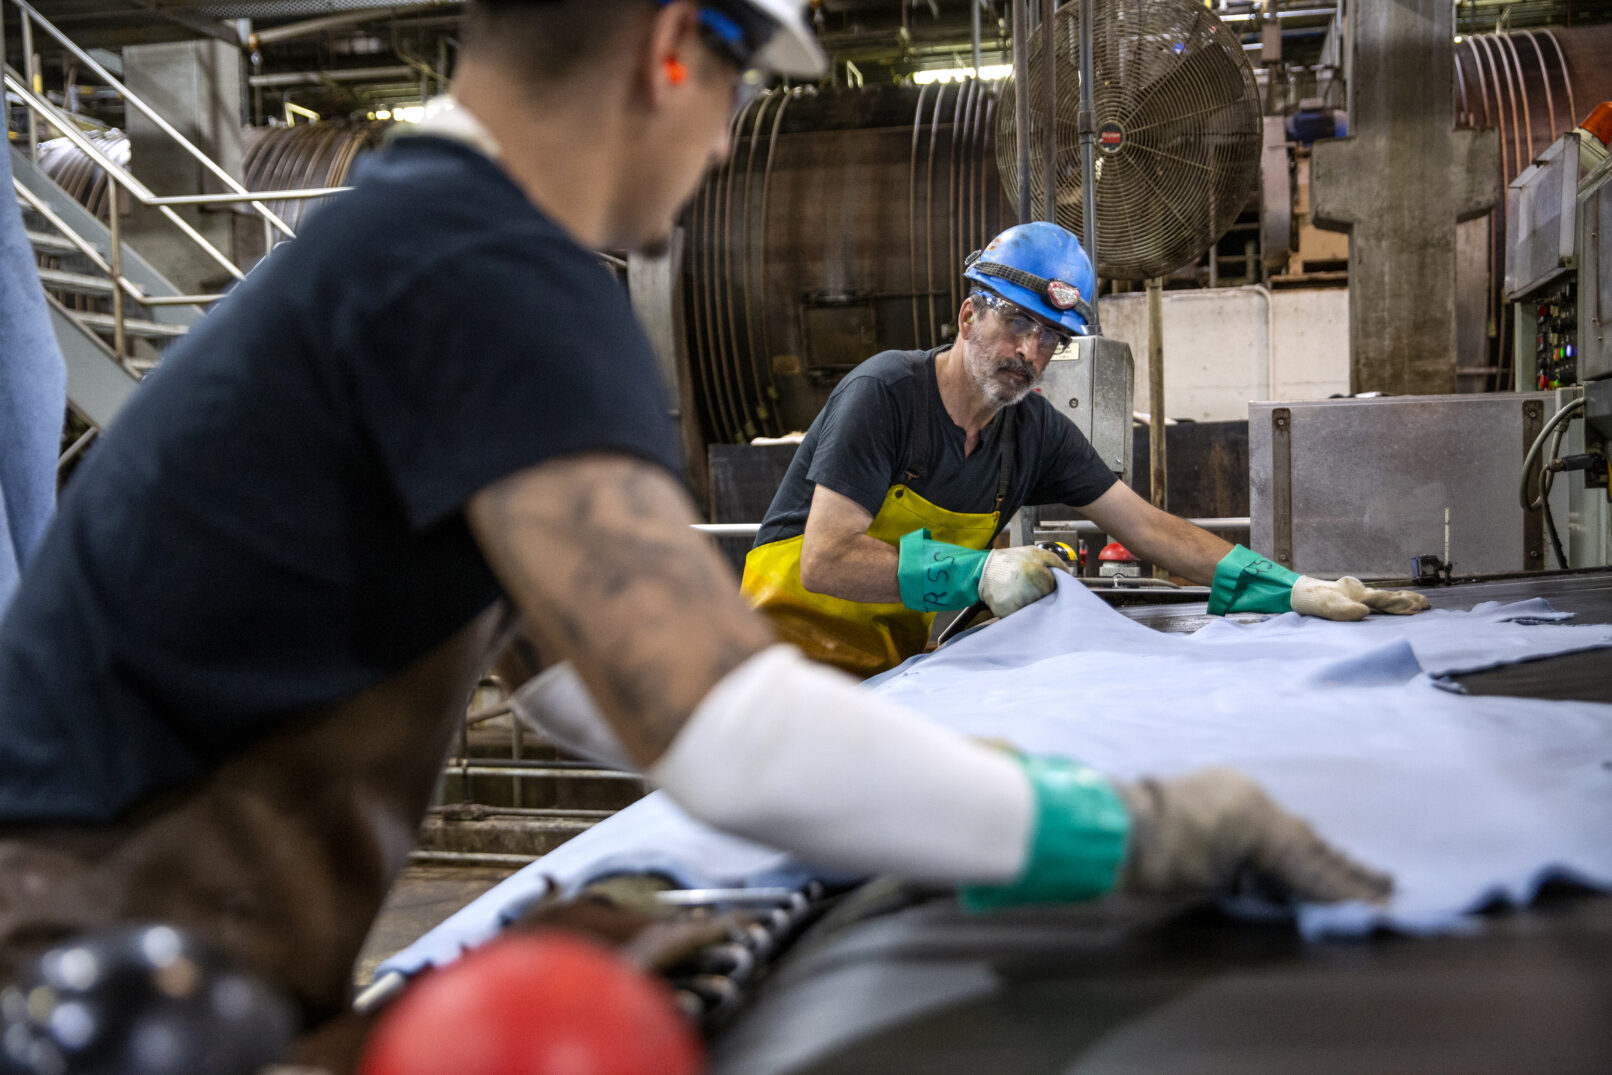 Two men work together to process leather at a tannery in South Dakota.